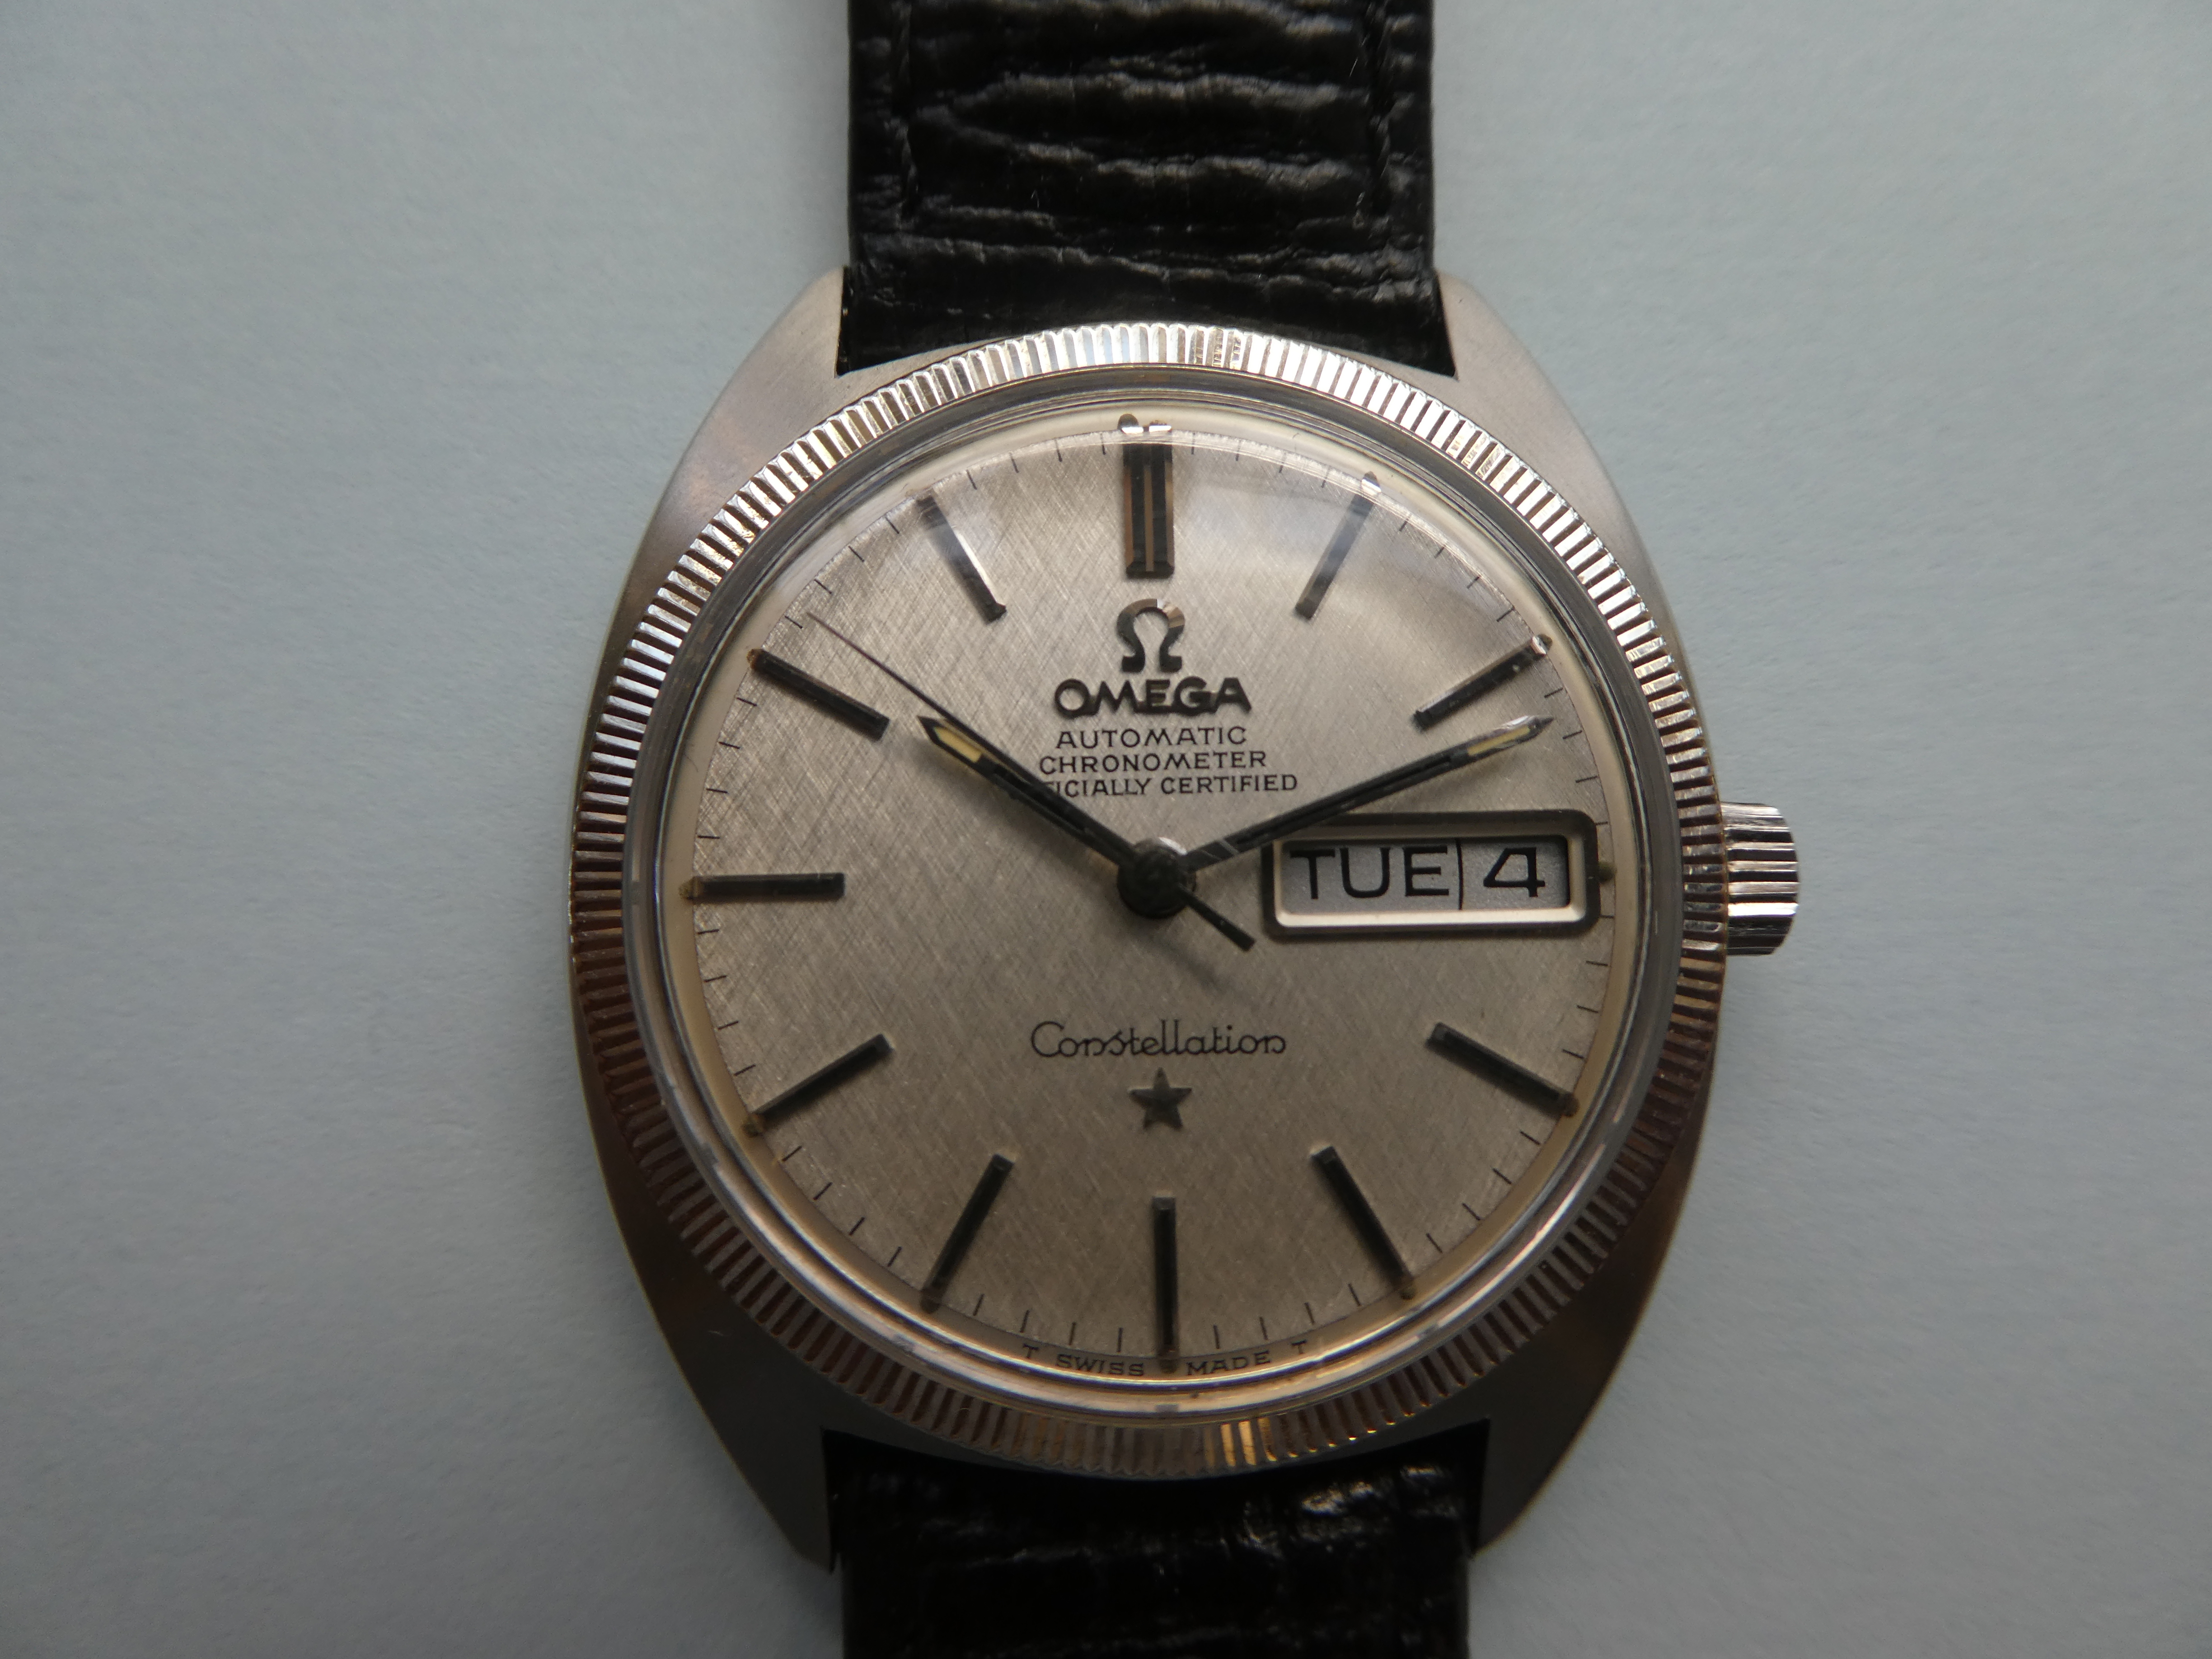 Service: Omega Automatic Constellation 